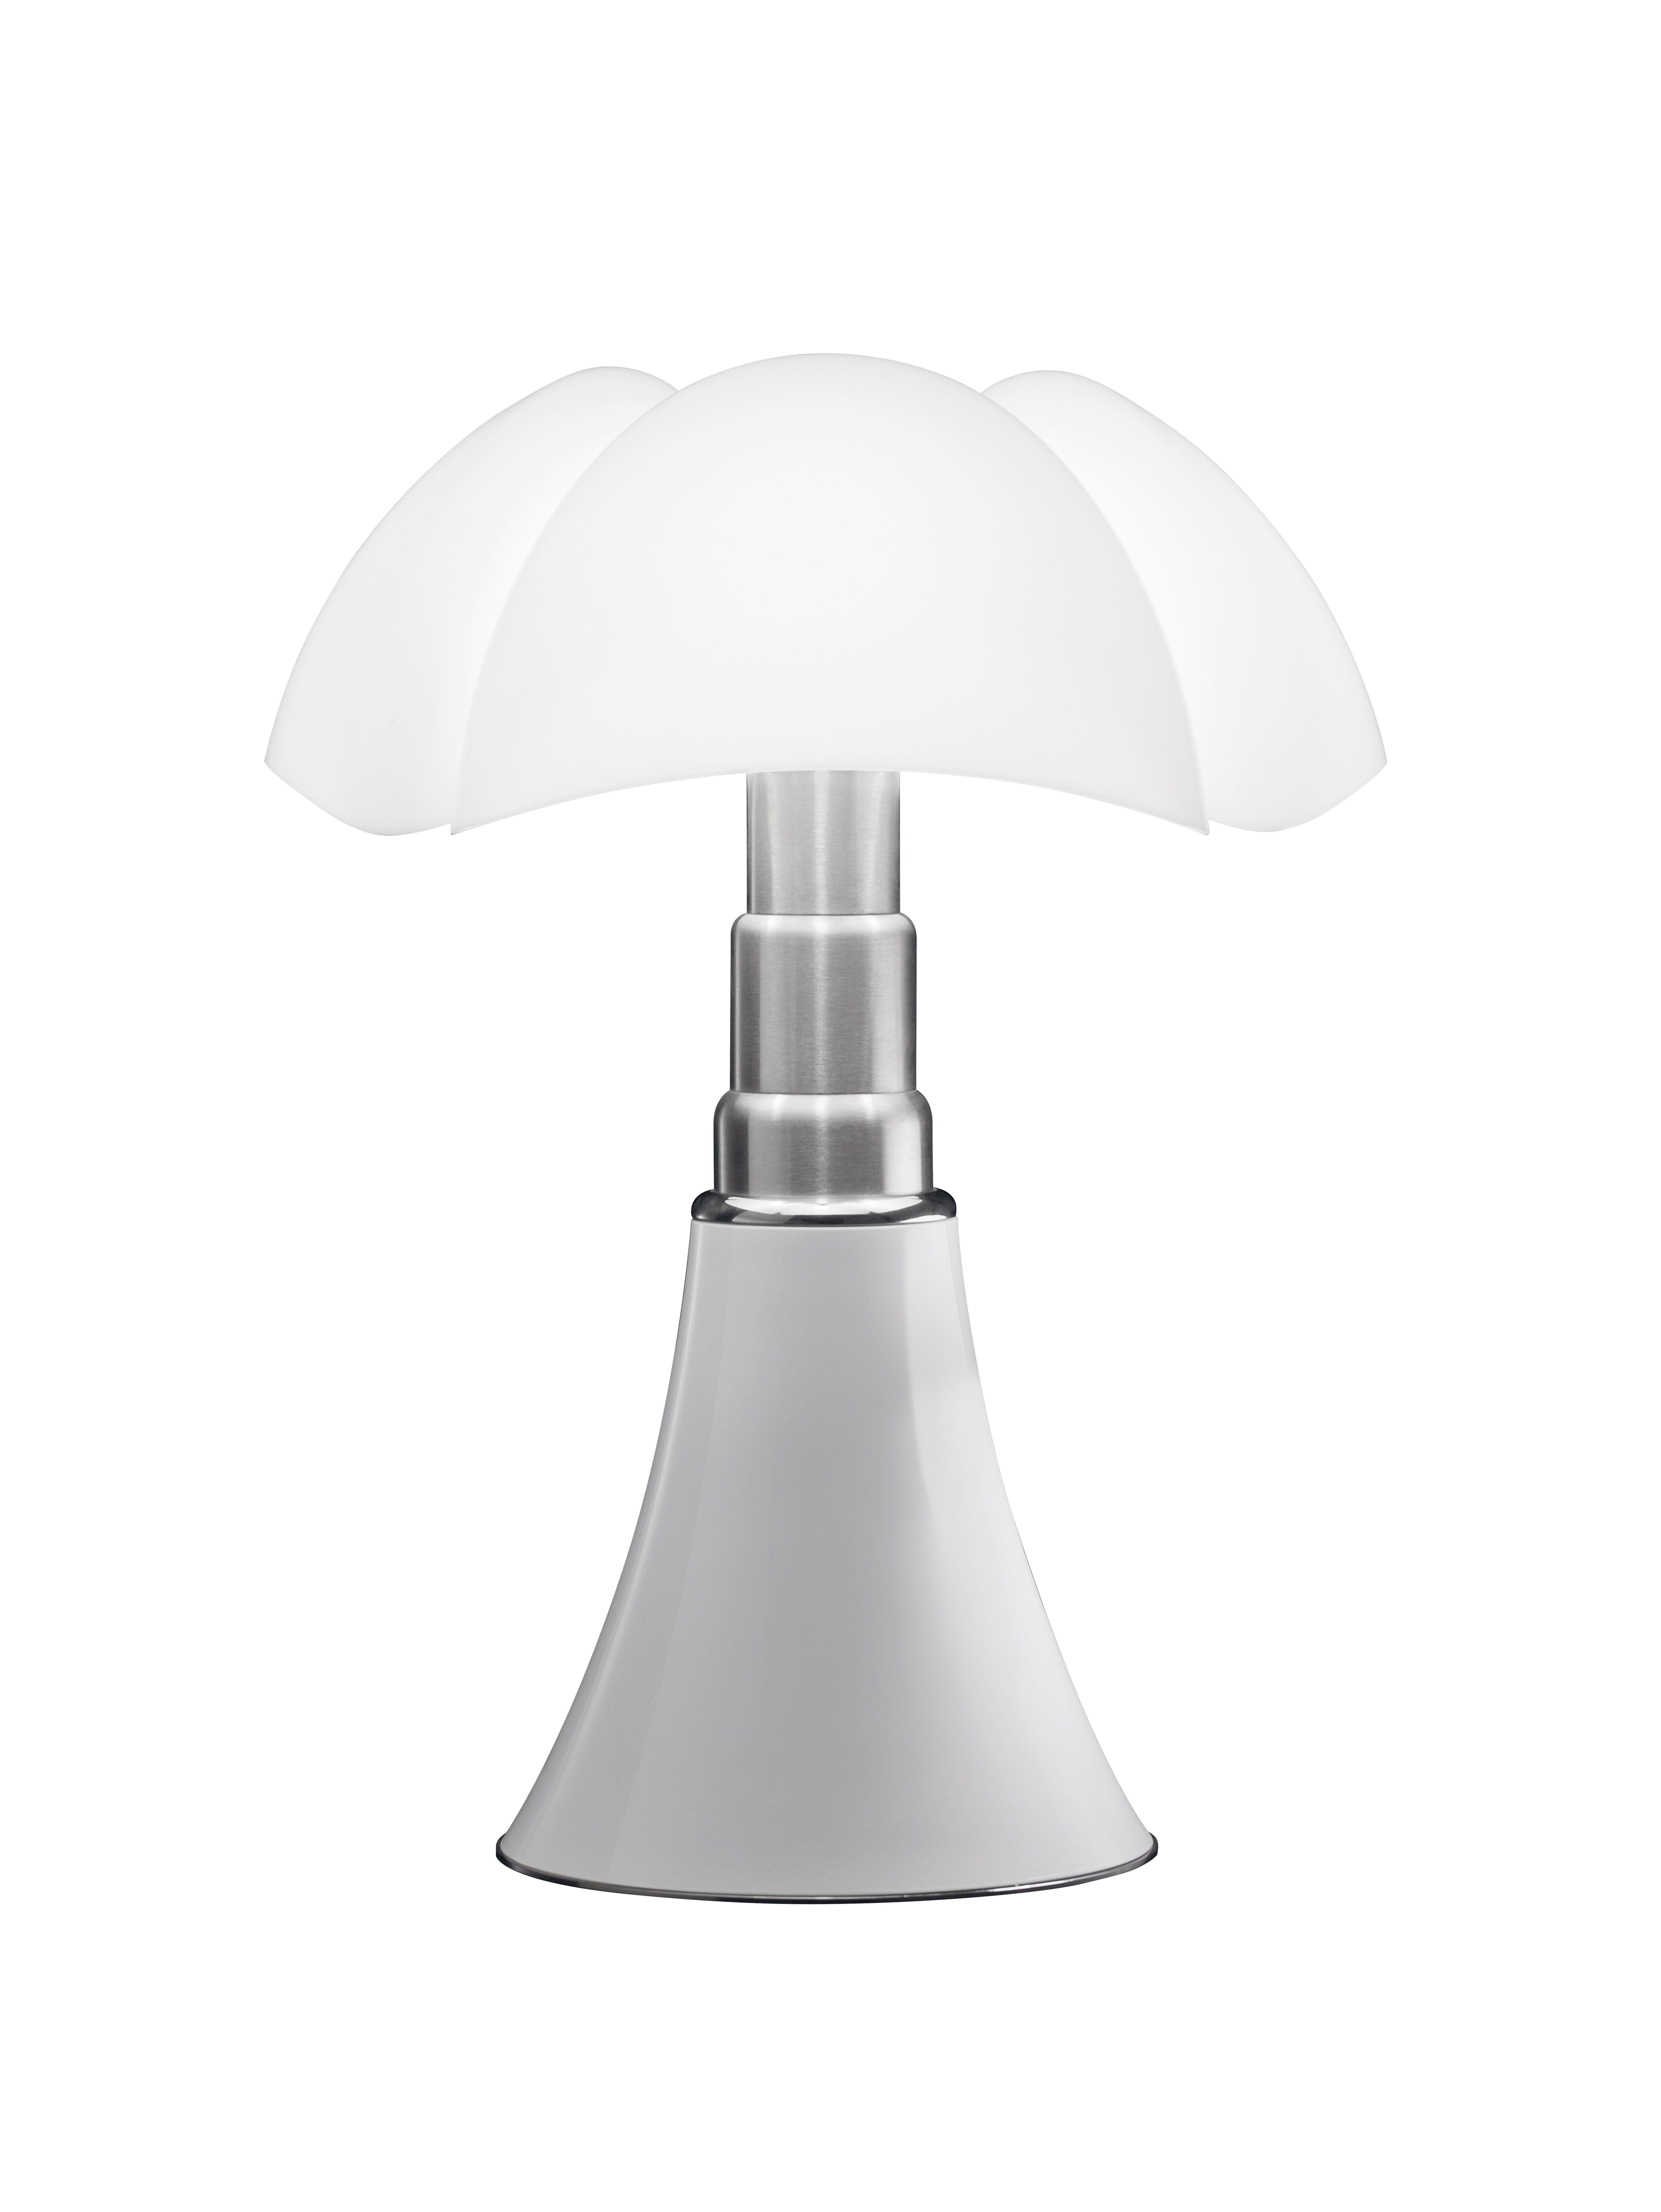 For Sale: White (Bianco) Martinelli Luce Dimmable LED Pipistrello 620 Table Lamp by Gae Aulenti